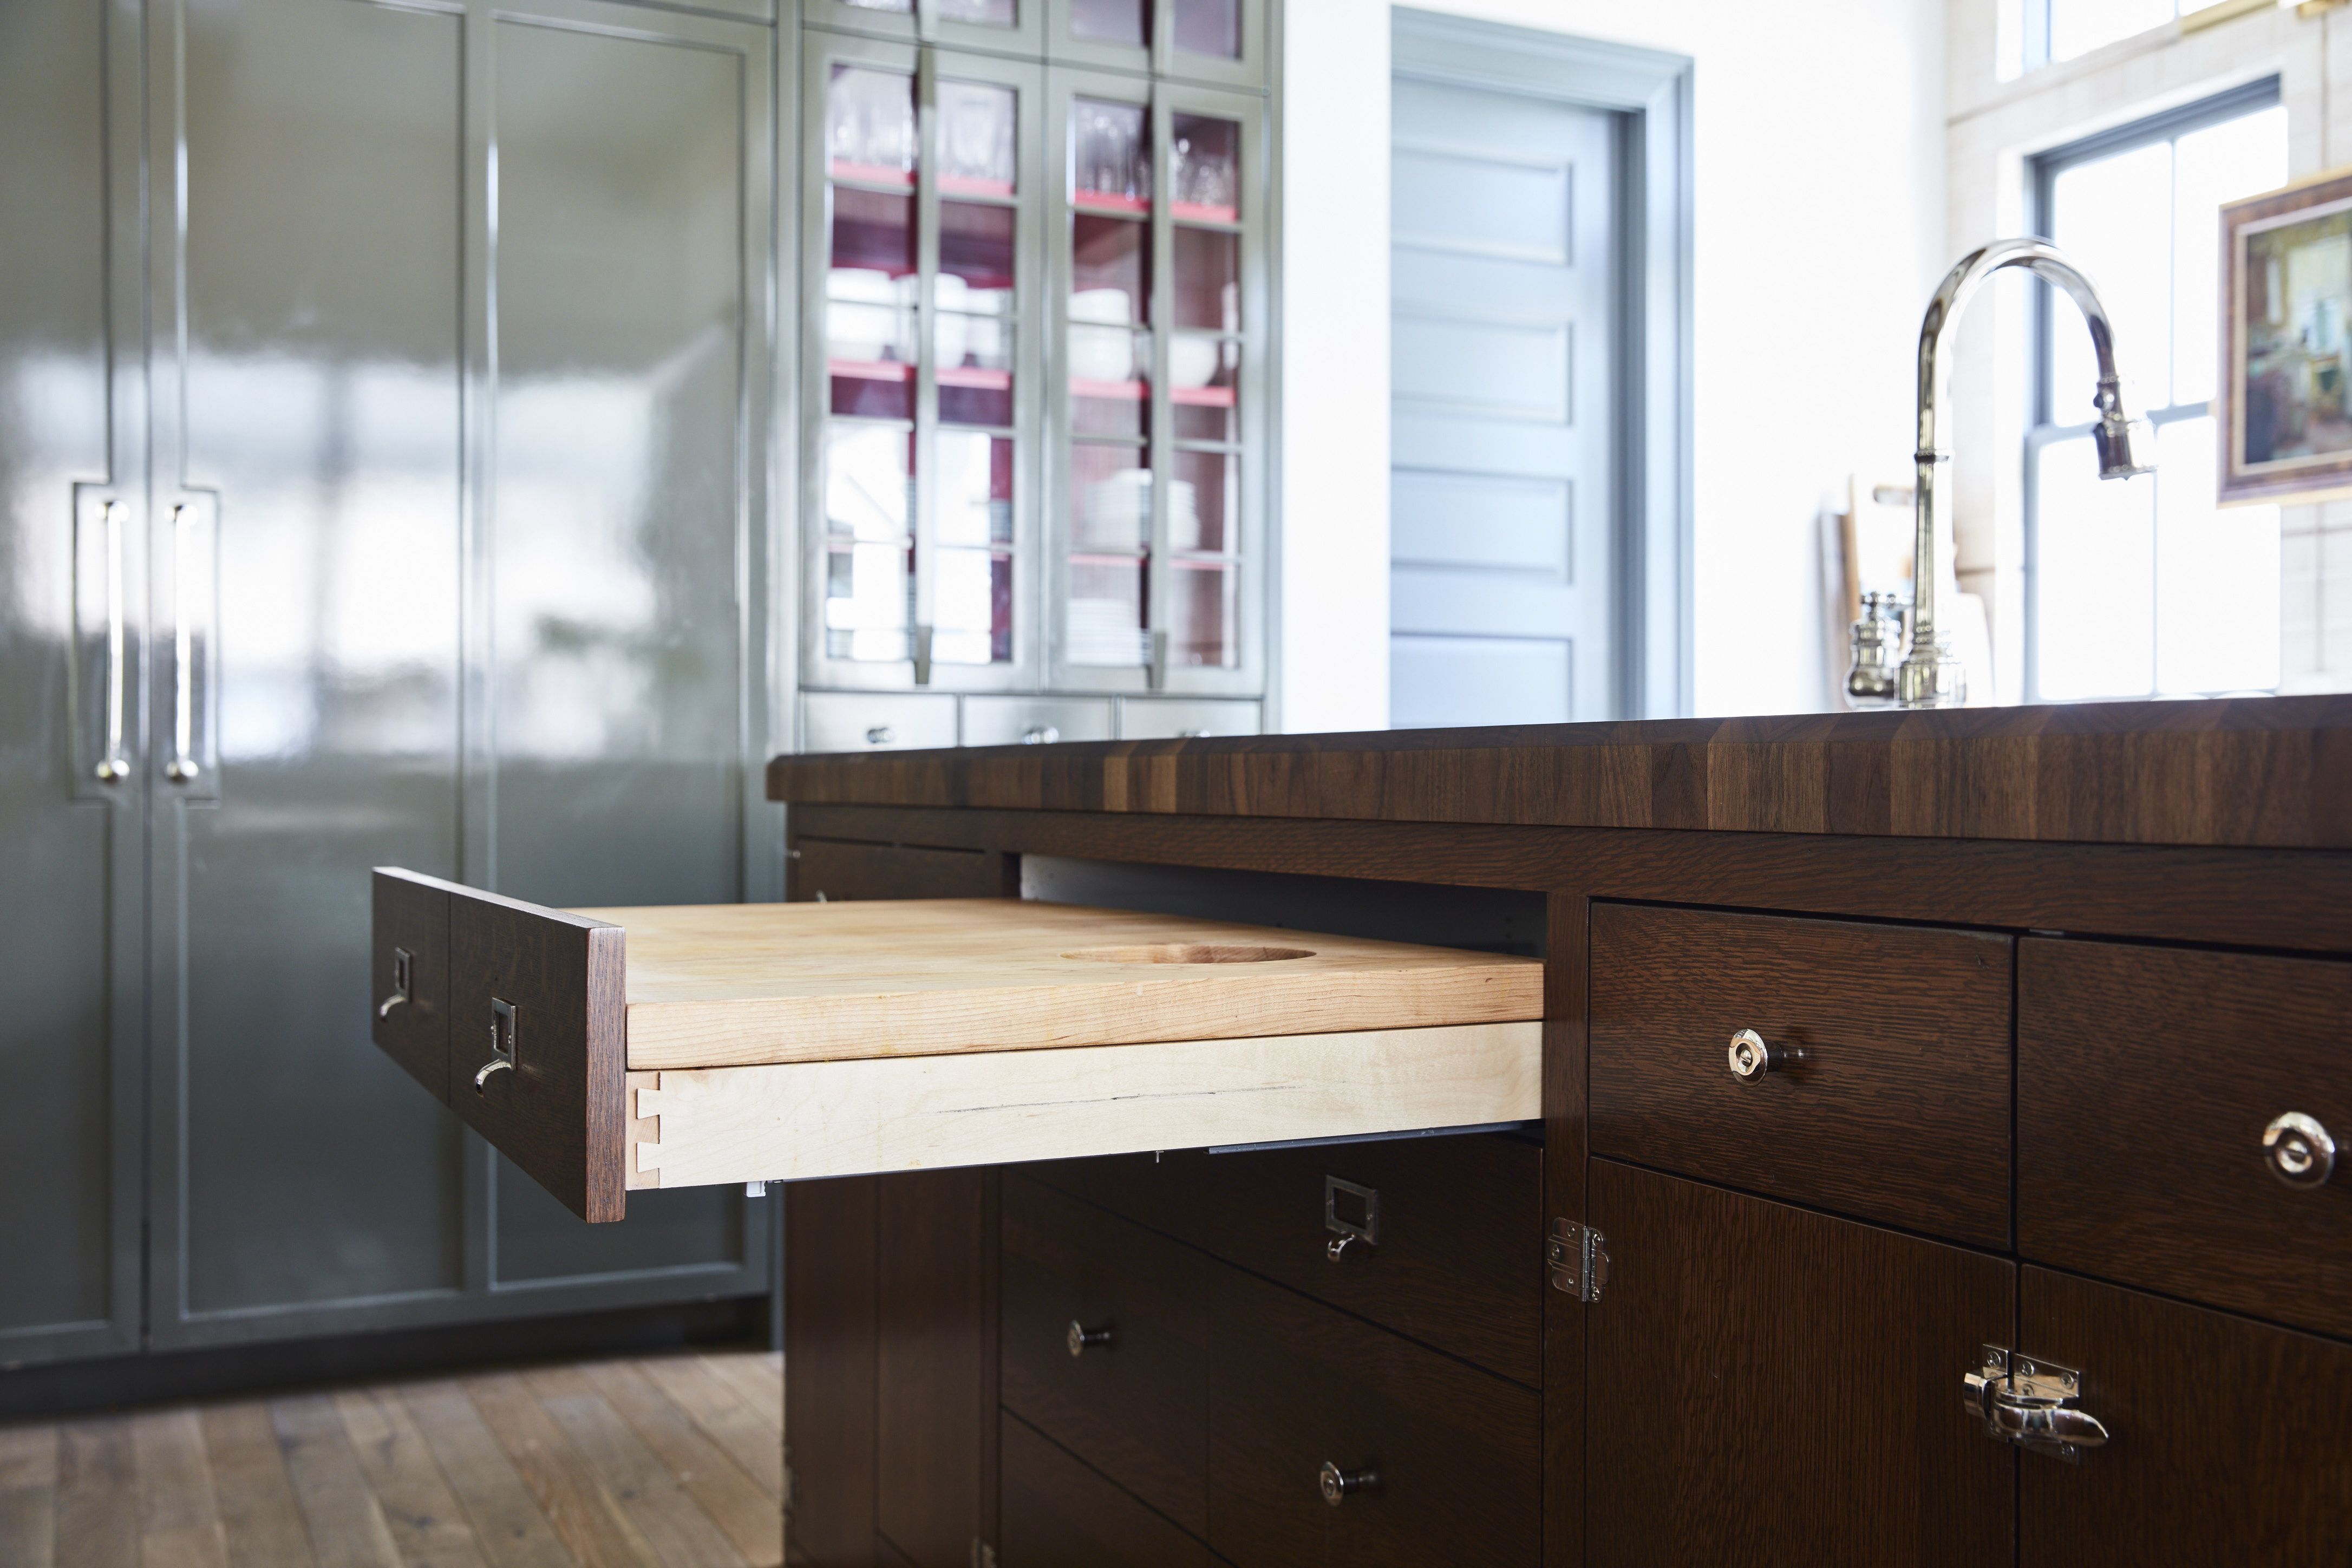 The Real Reason Old Kitchens Have Pull-Out Cutting Boards will Surprise You